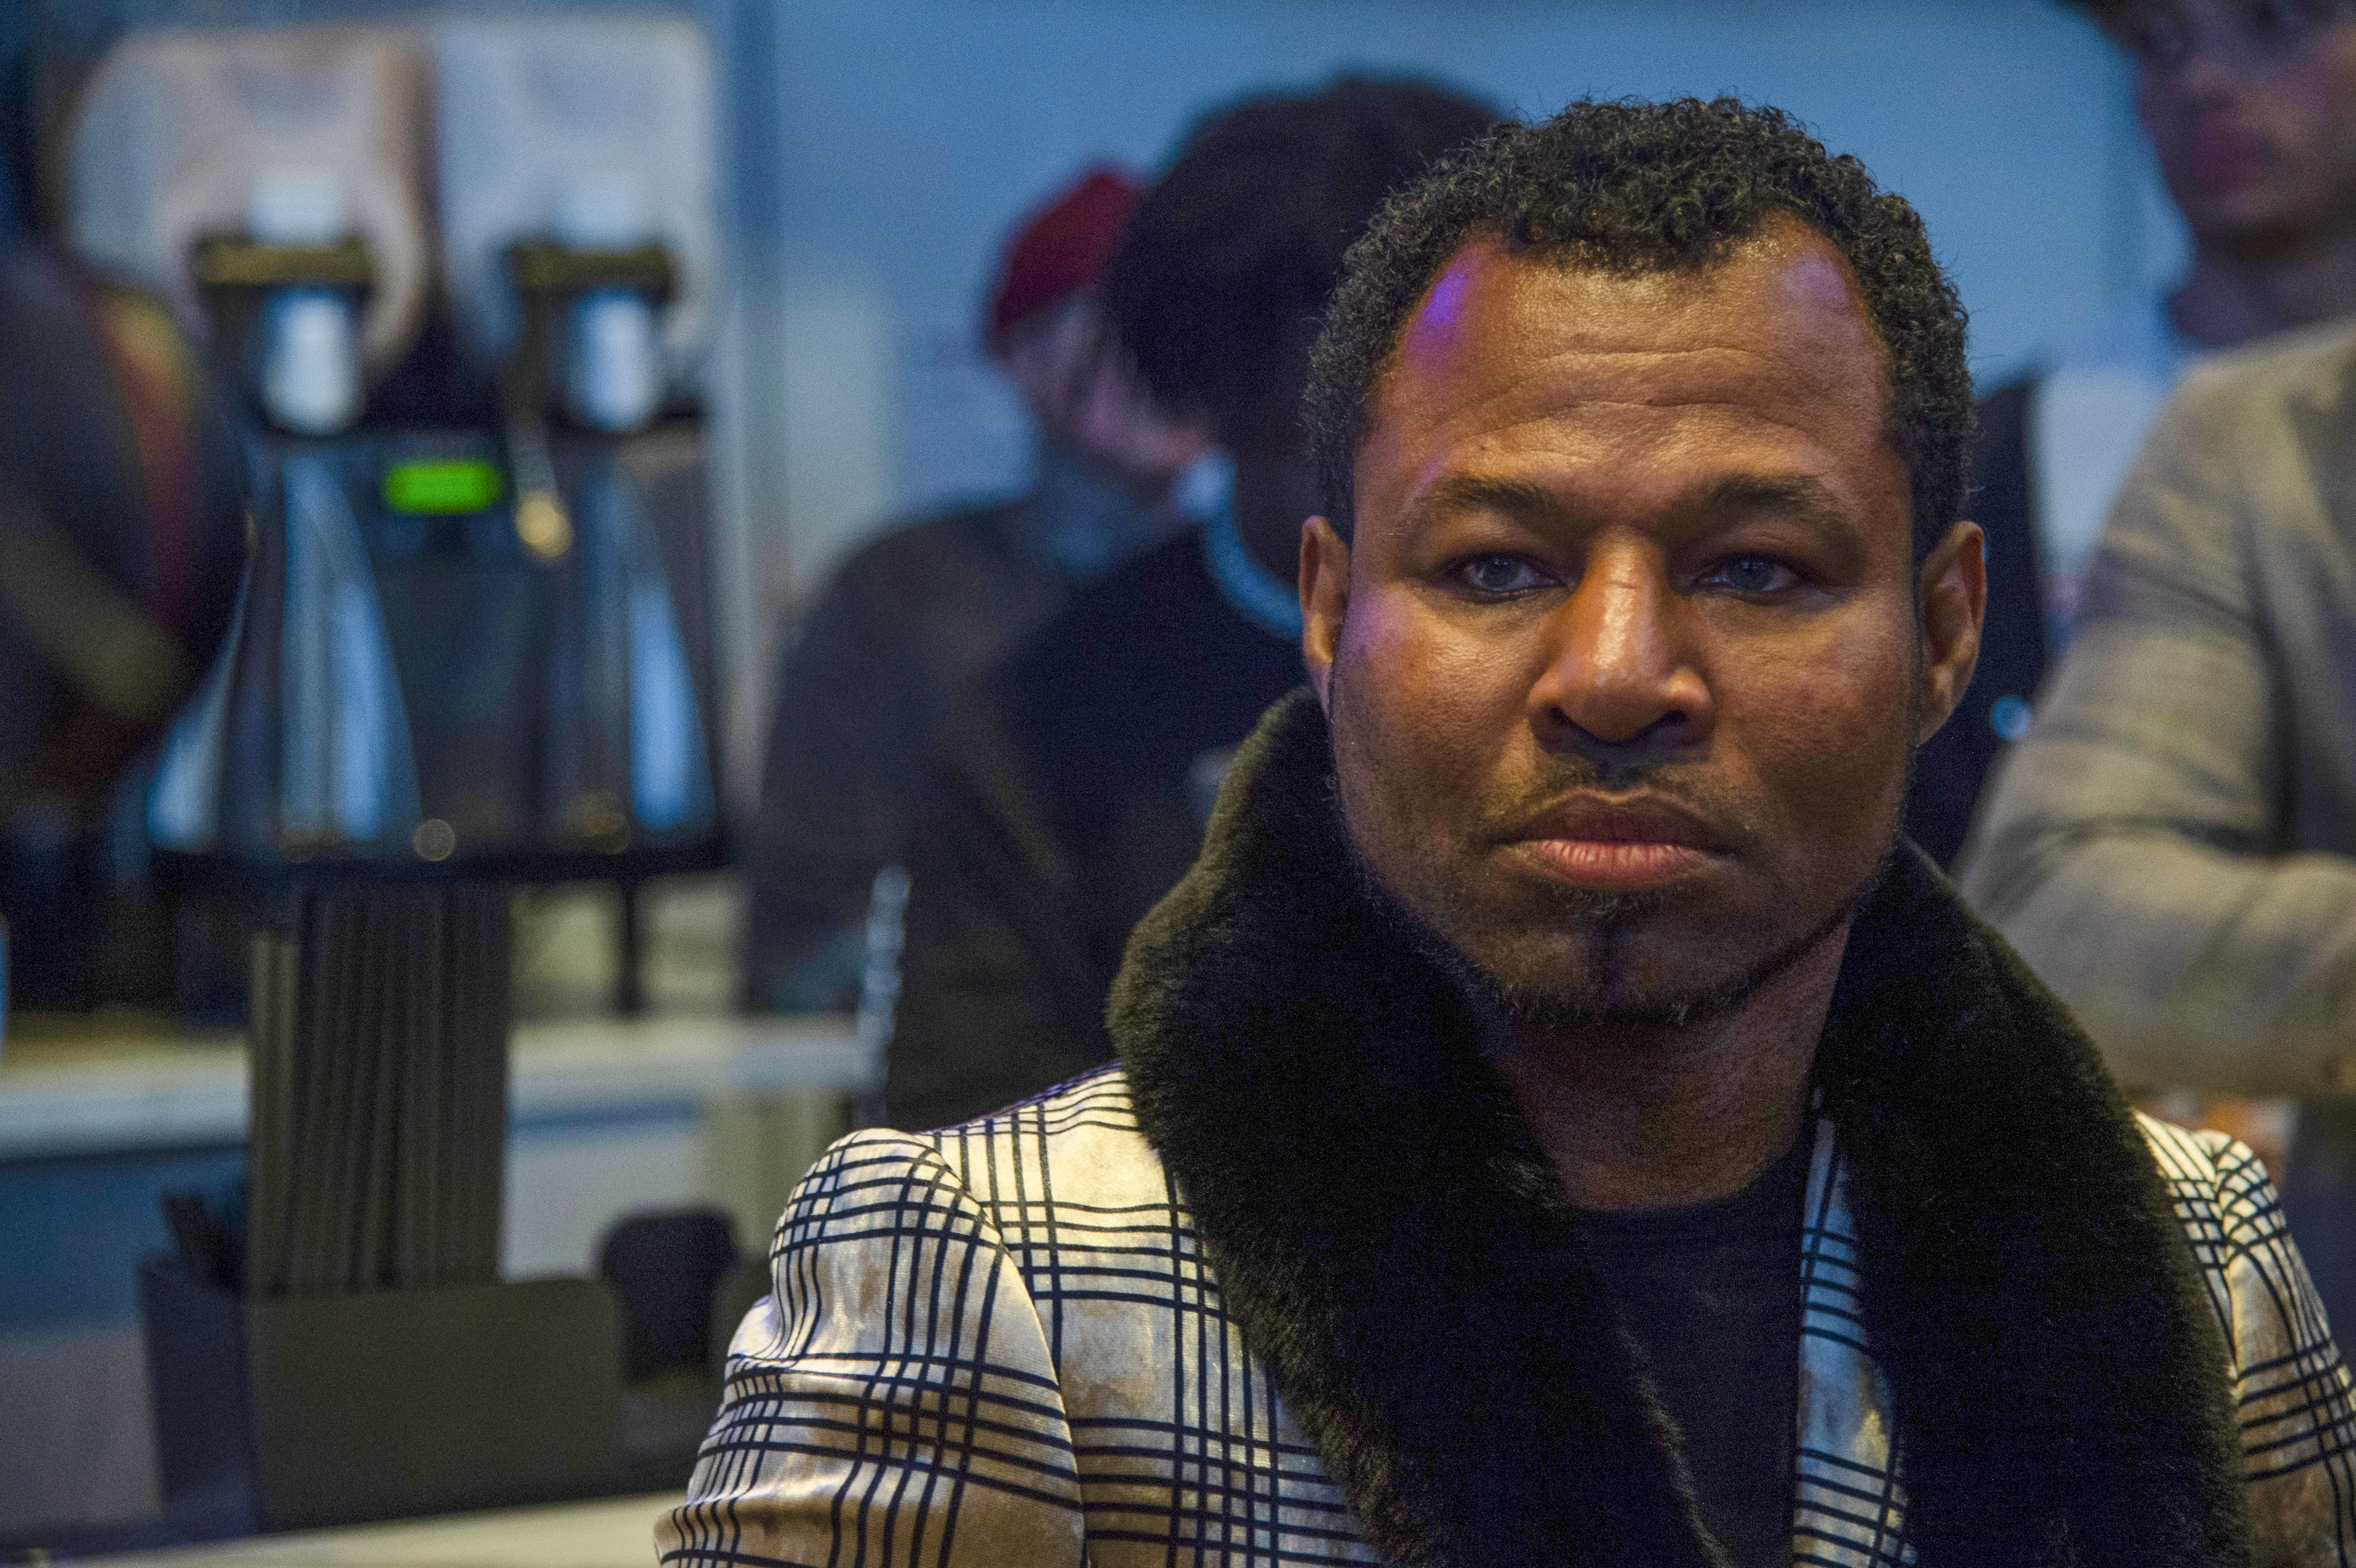 Although Shane Mosley thinks Shakur Stevenson is the best lightweight, he isn’t too sure how he’d handle someone like Gervonta Davis.